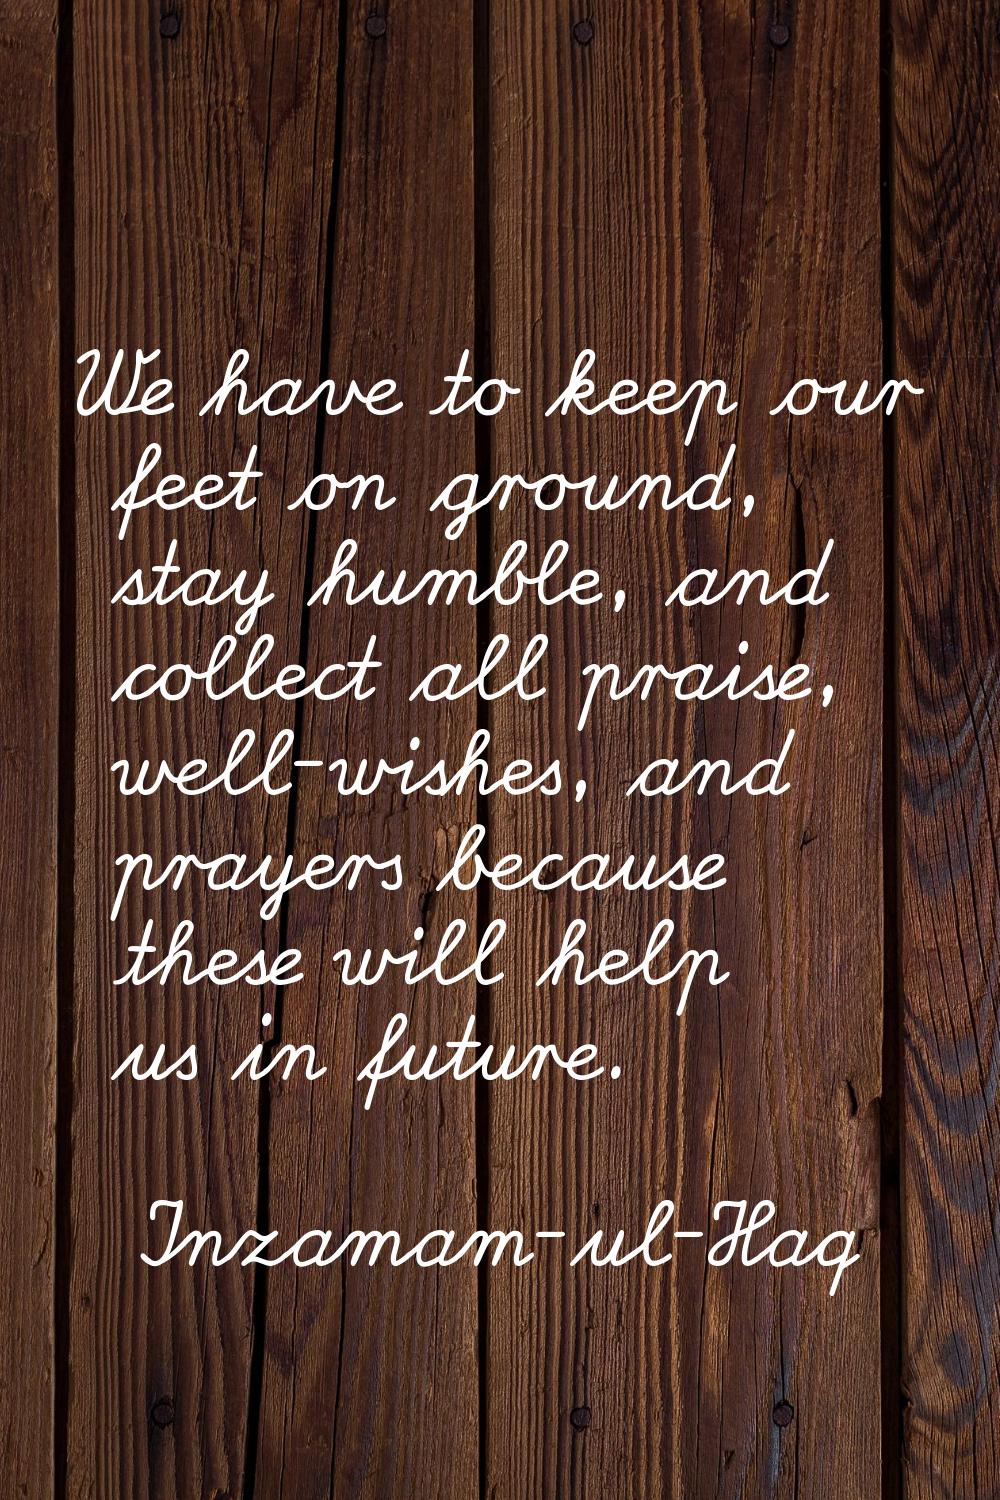 We have to keep our feet on ground, stay humble, and collect all praise, well-wishes, and prayers b